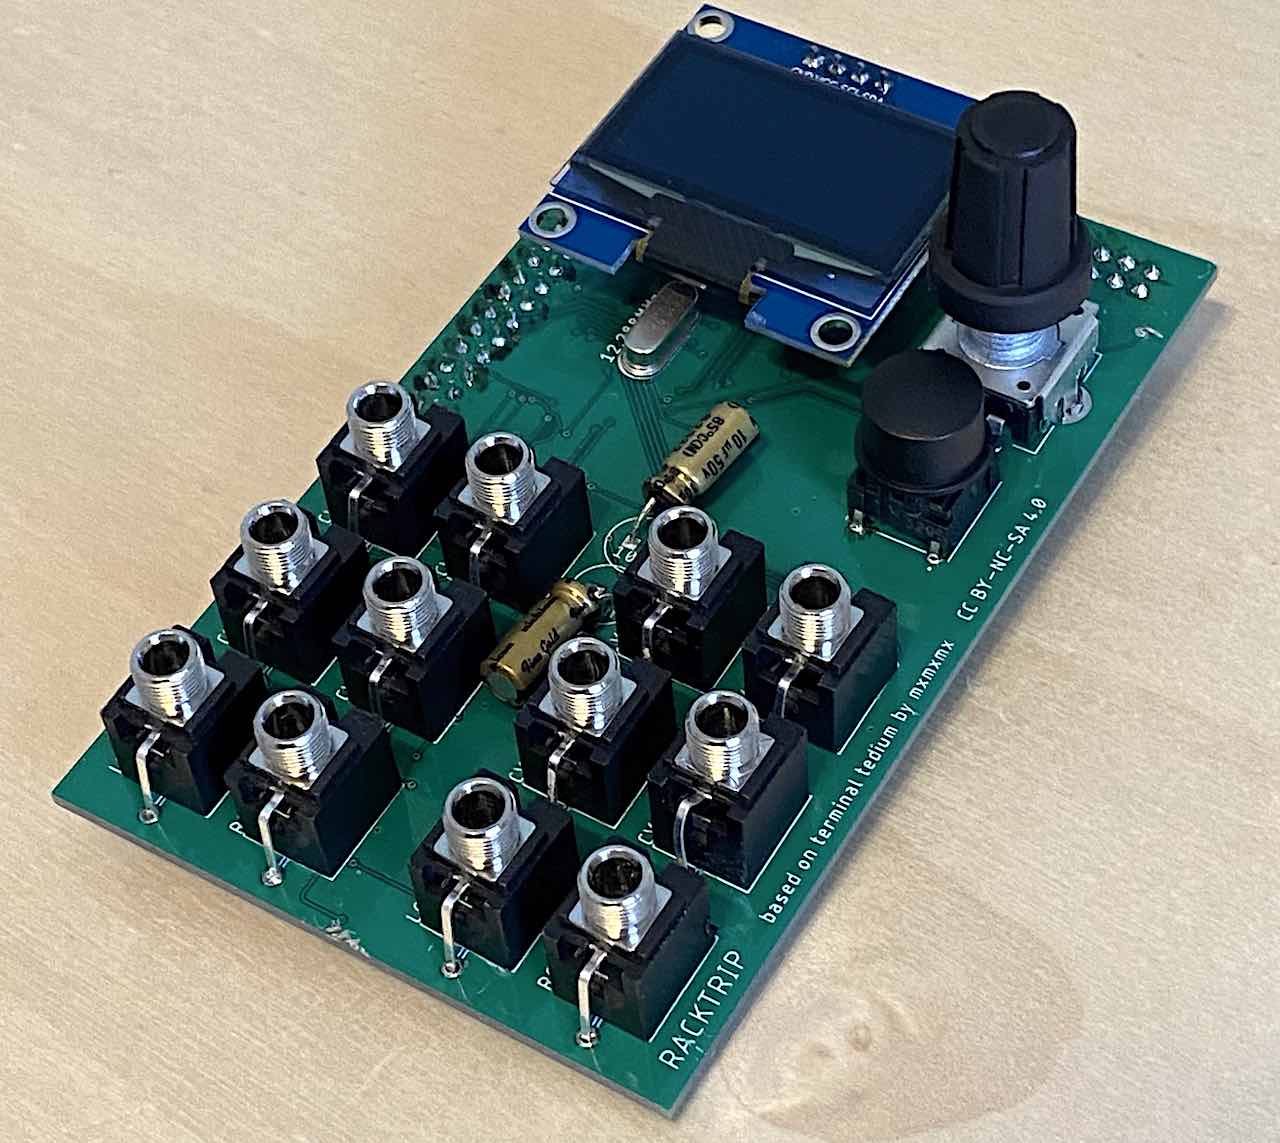 Eurorack module for patching audio & CV over network